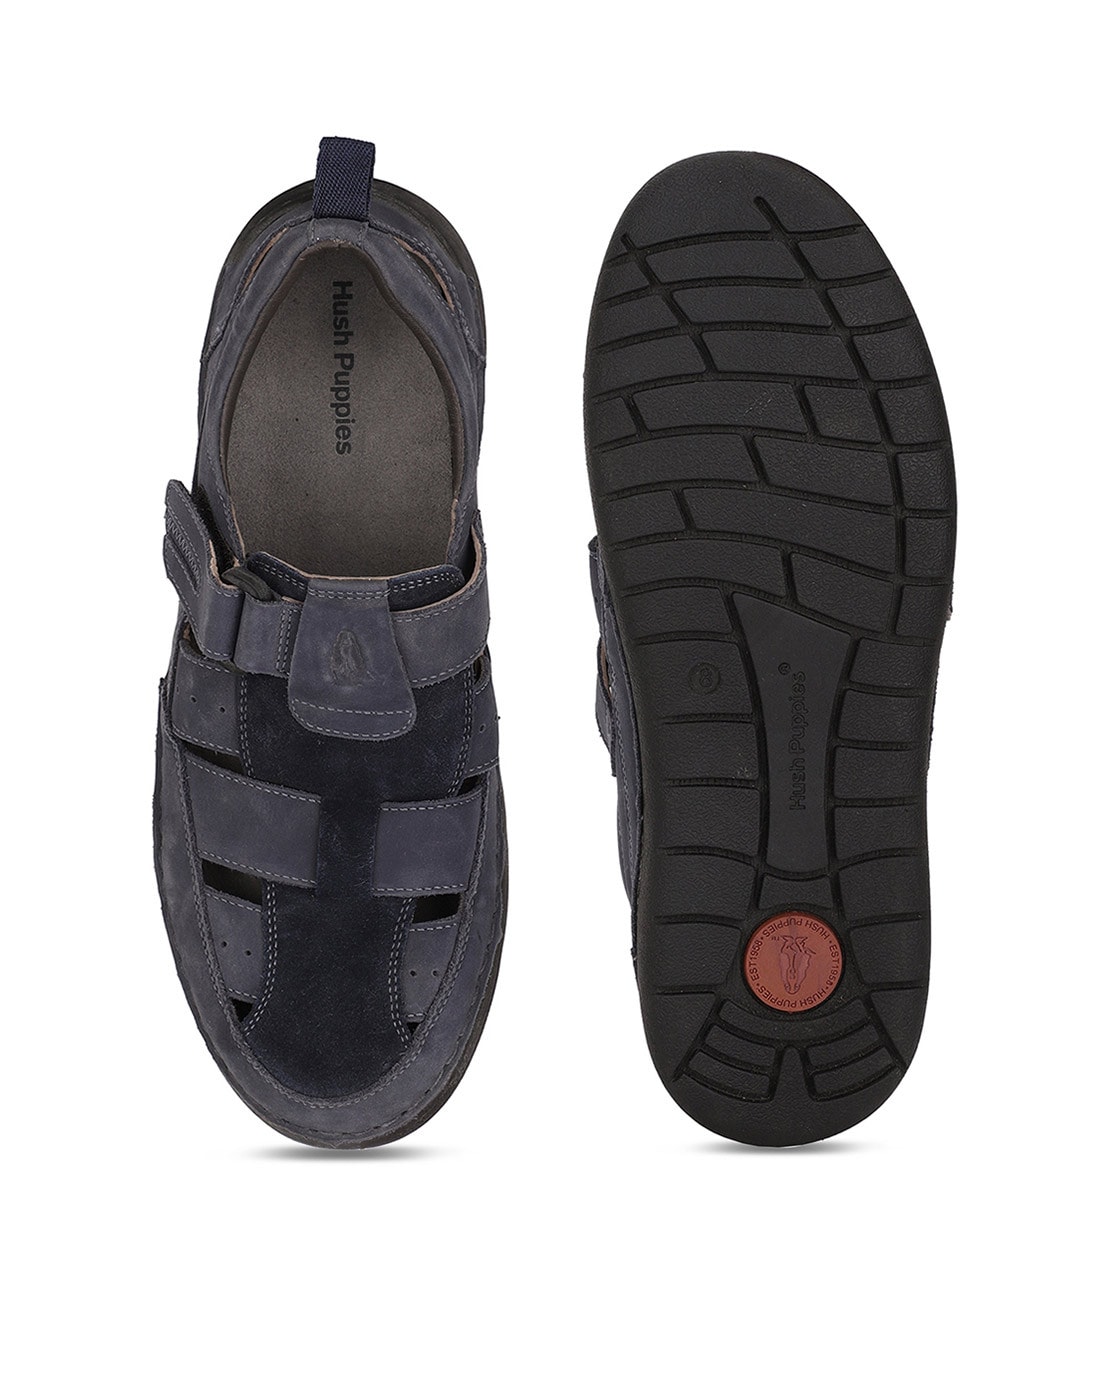 Hush Puppies Sandals Floaters - Buy Hush Puppies Sandals Floaters Online at  Best Prices In India | Flipkart.com